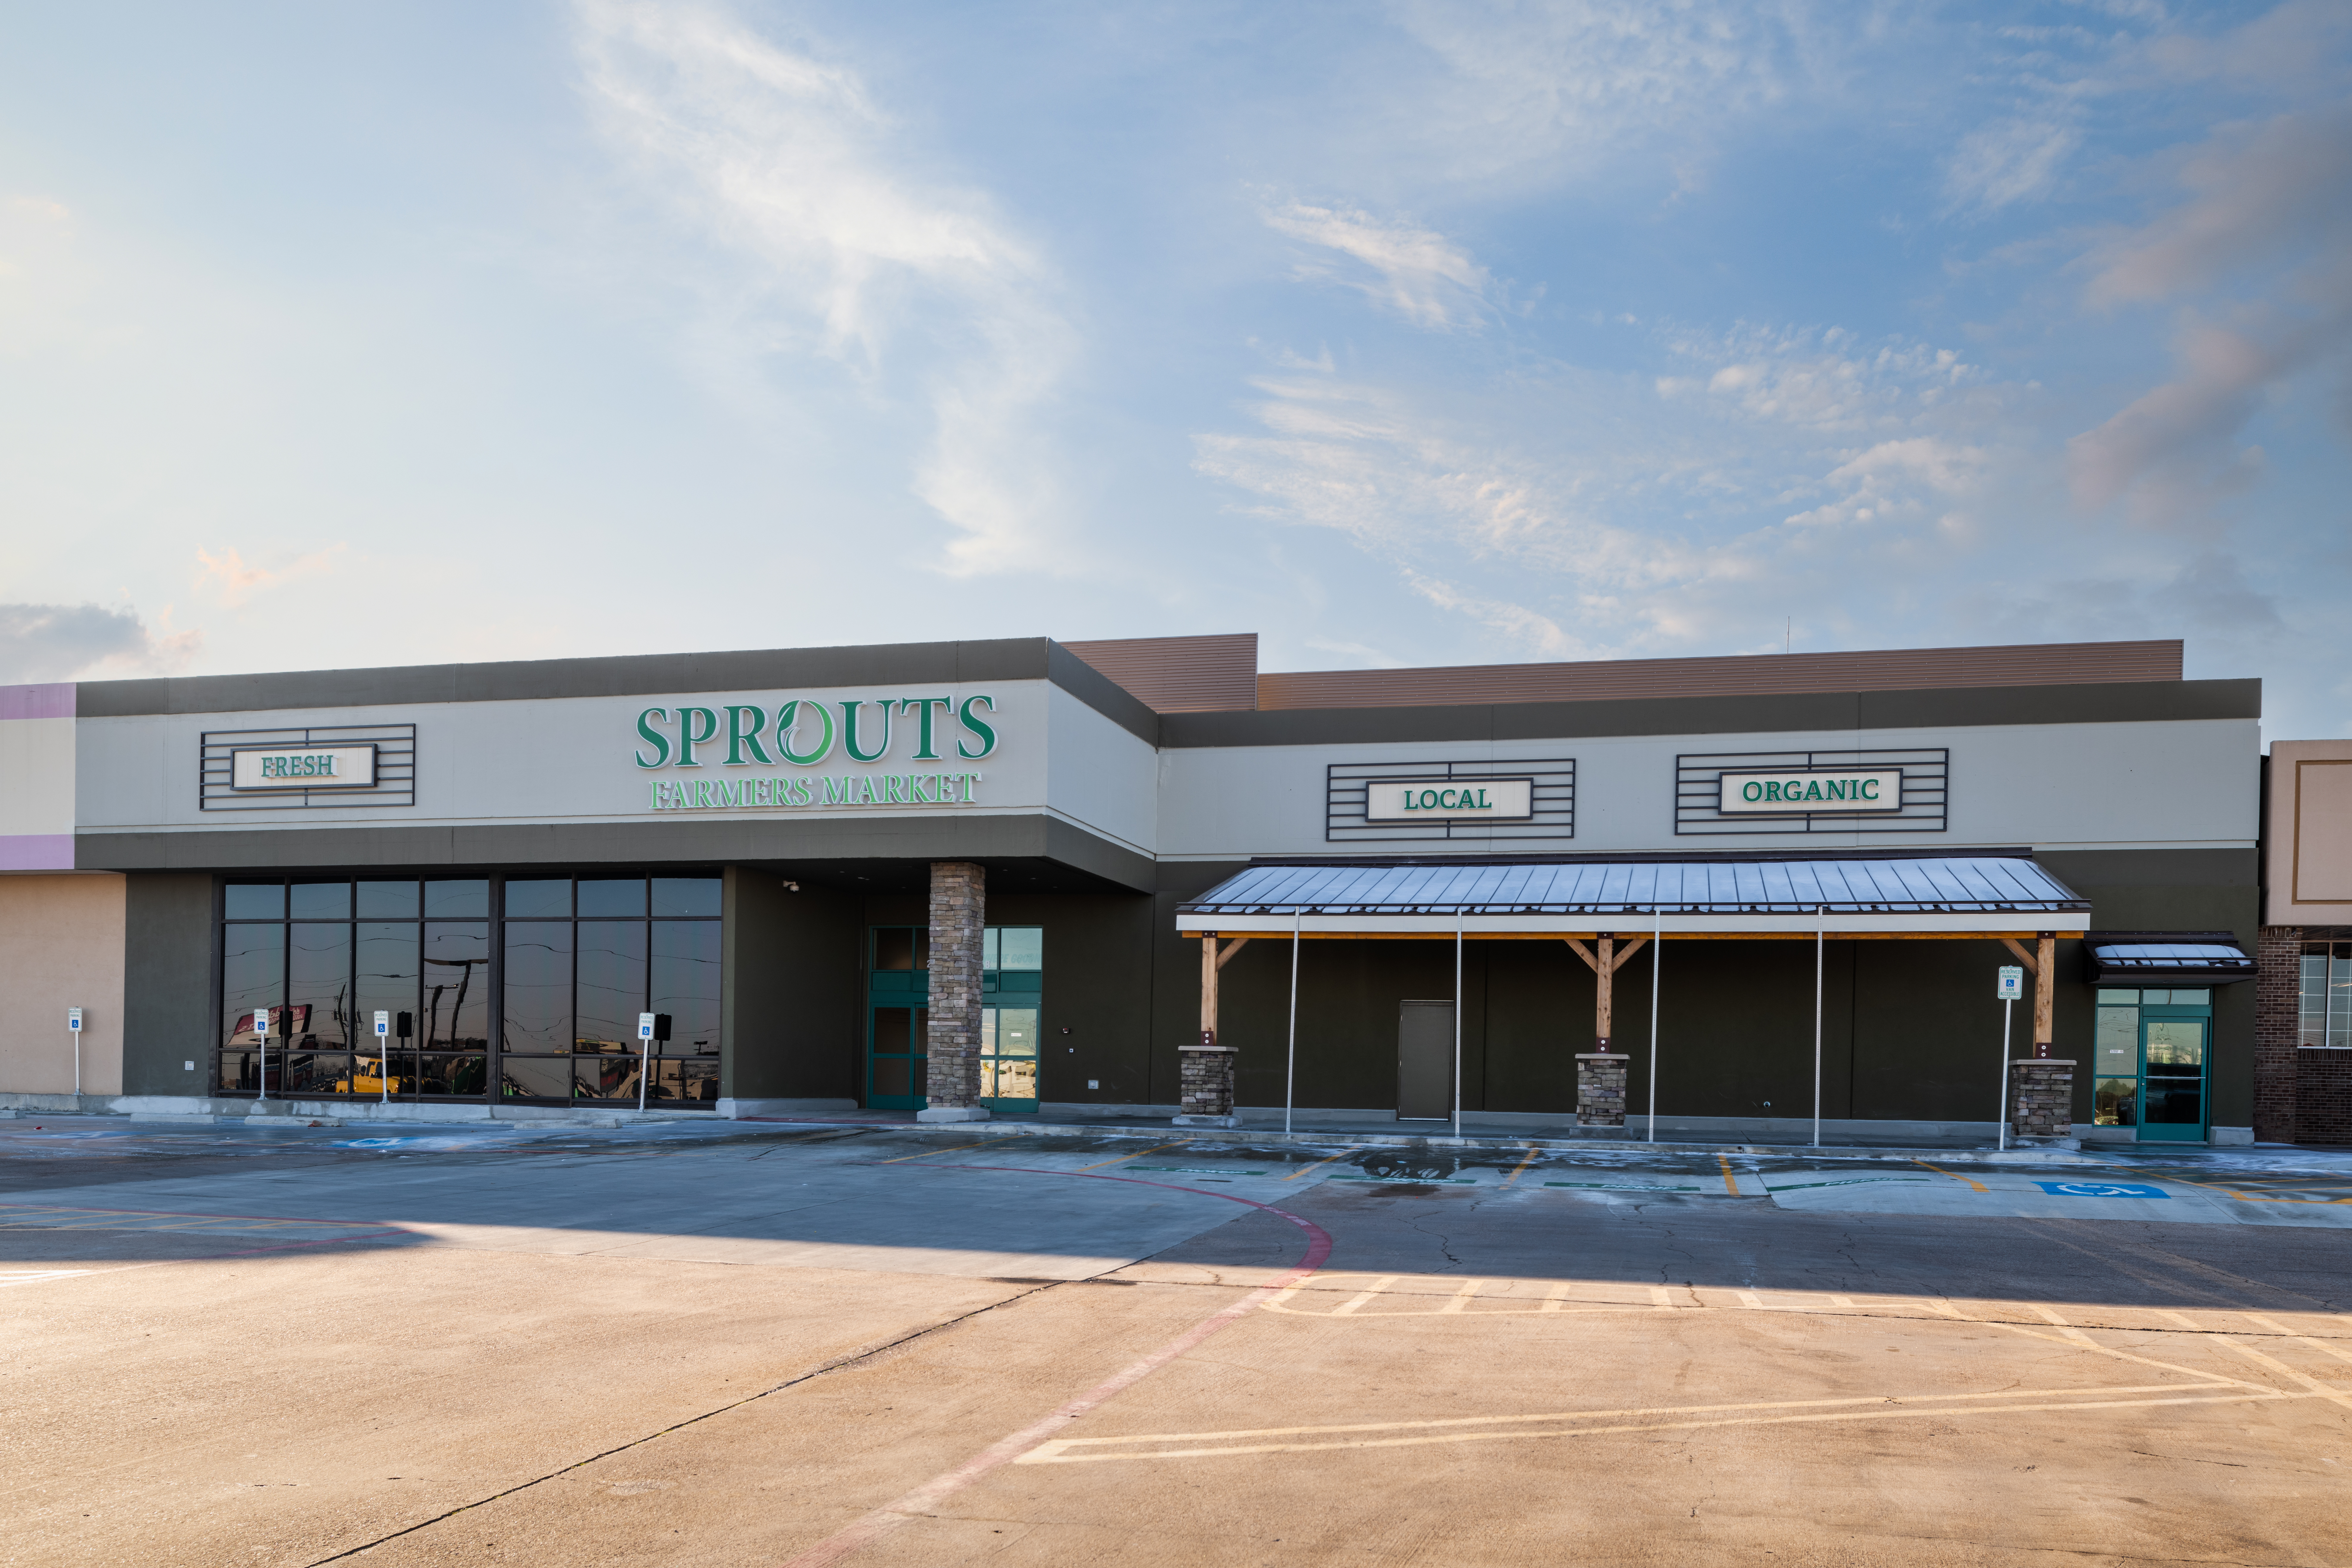 Exterior of Sprouts Grocery store building.